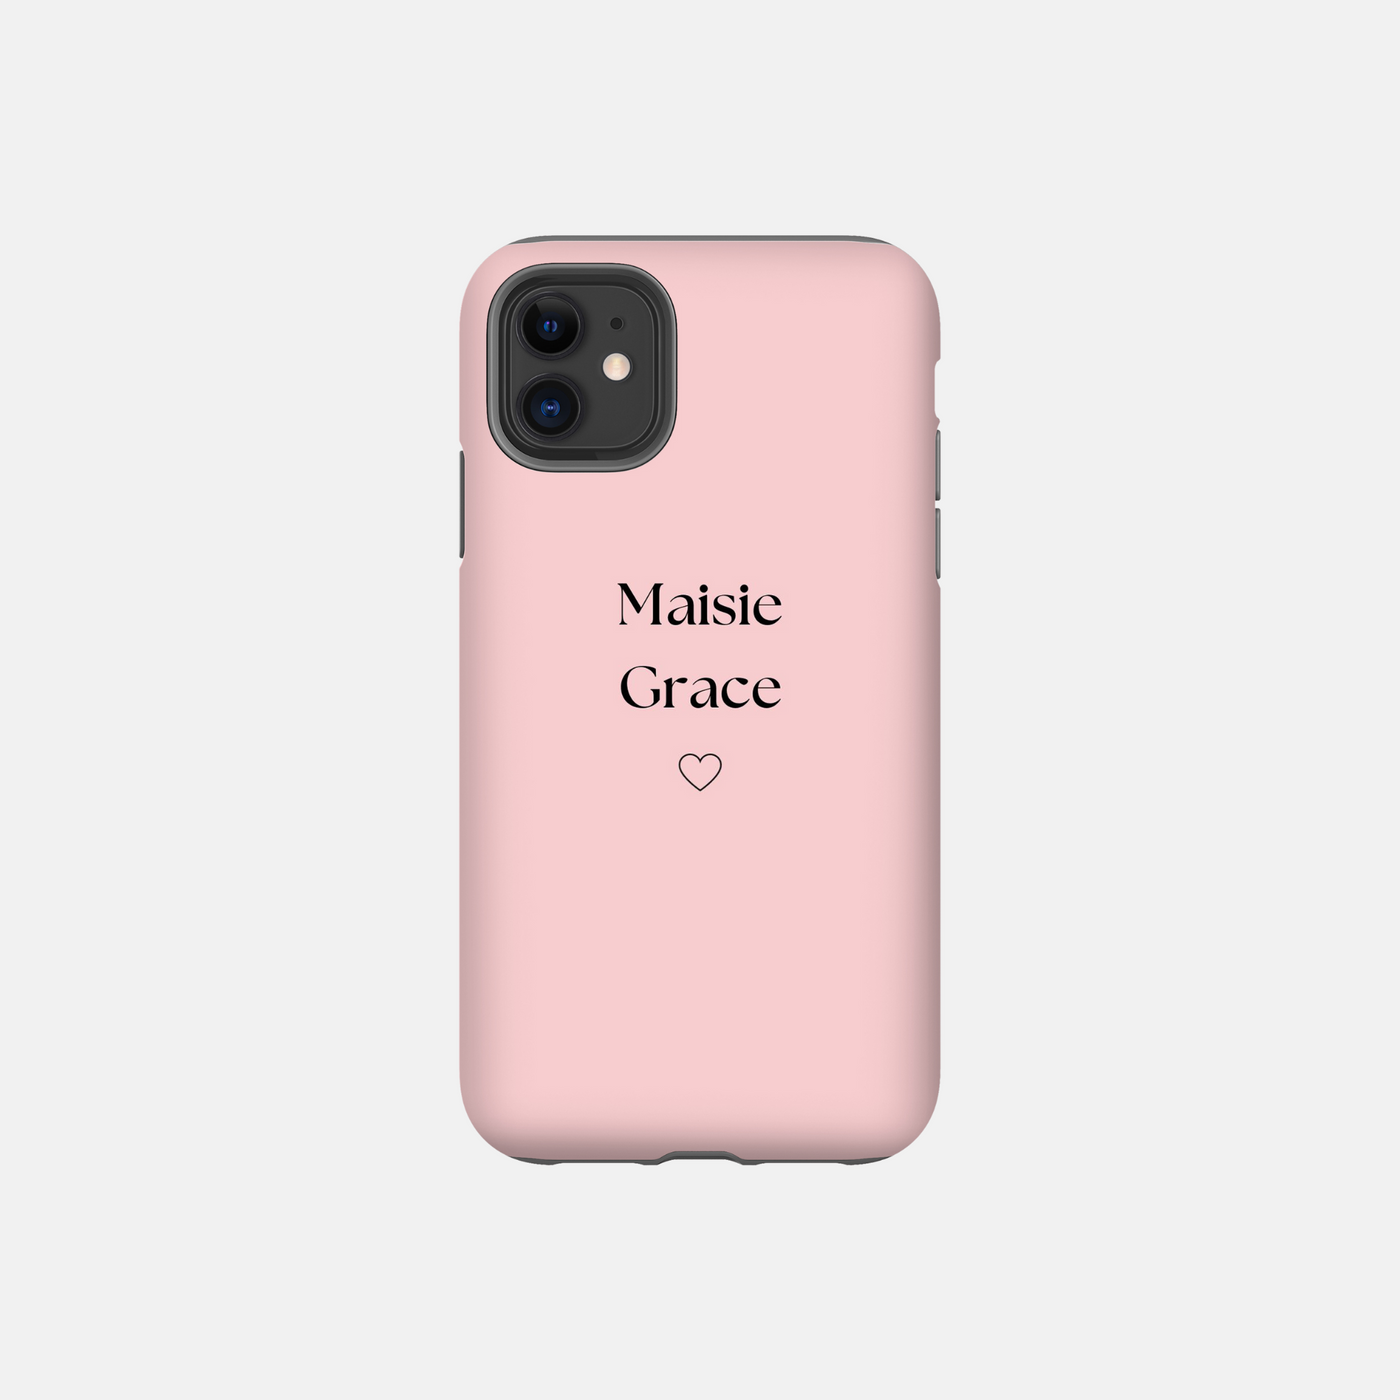 Limited Edition Personalised Phone Case | Children's Names in Blush